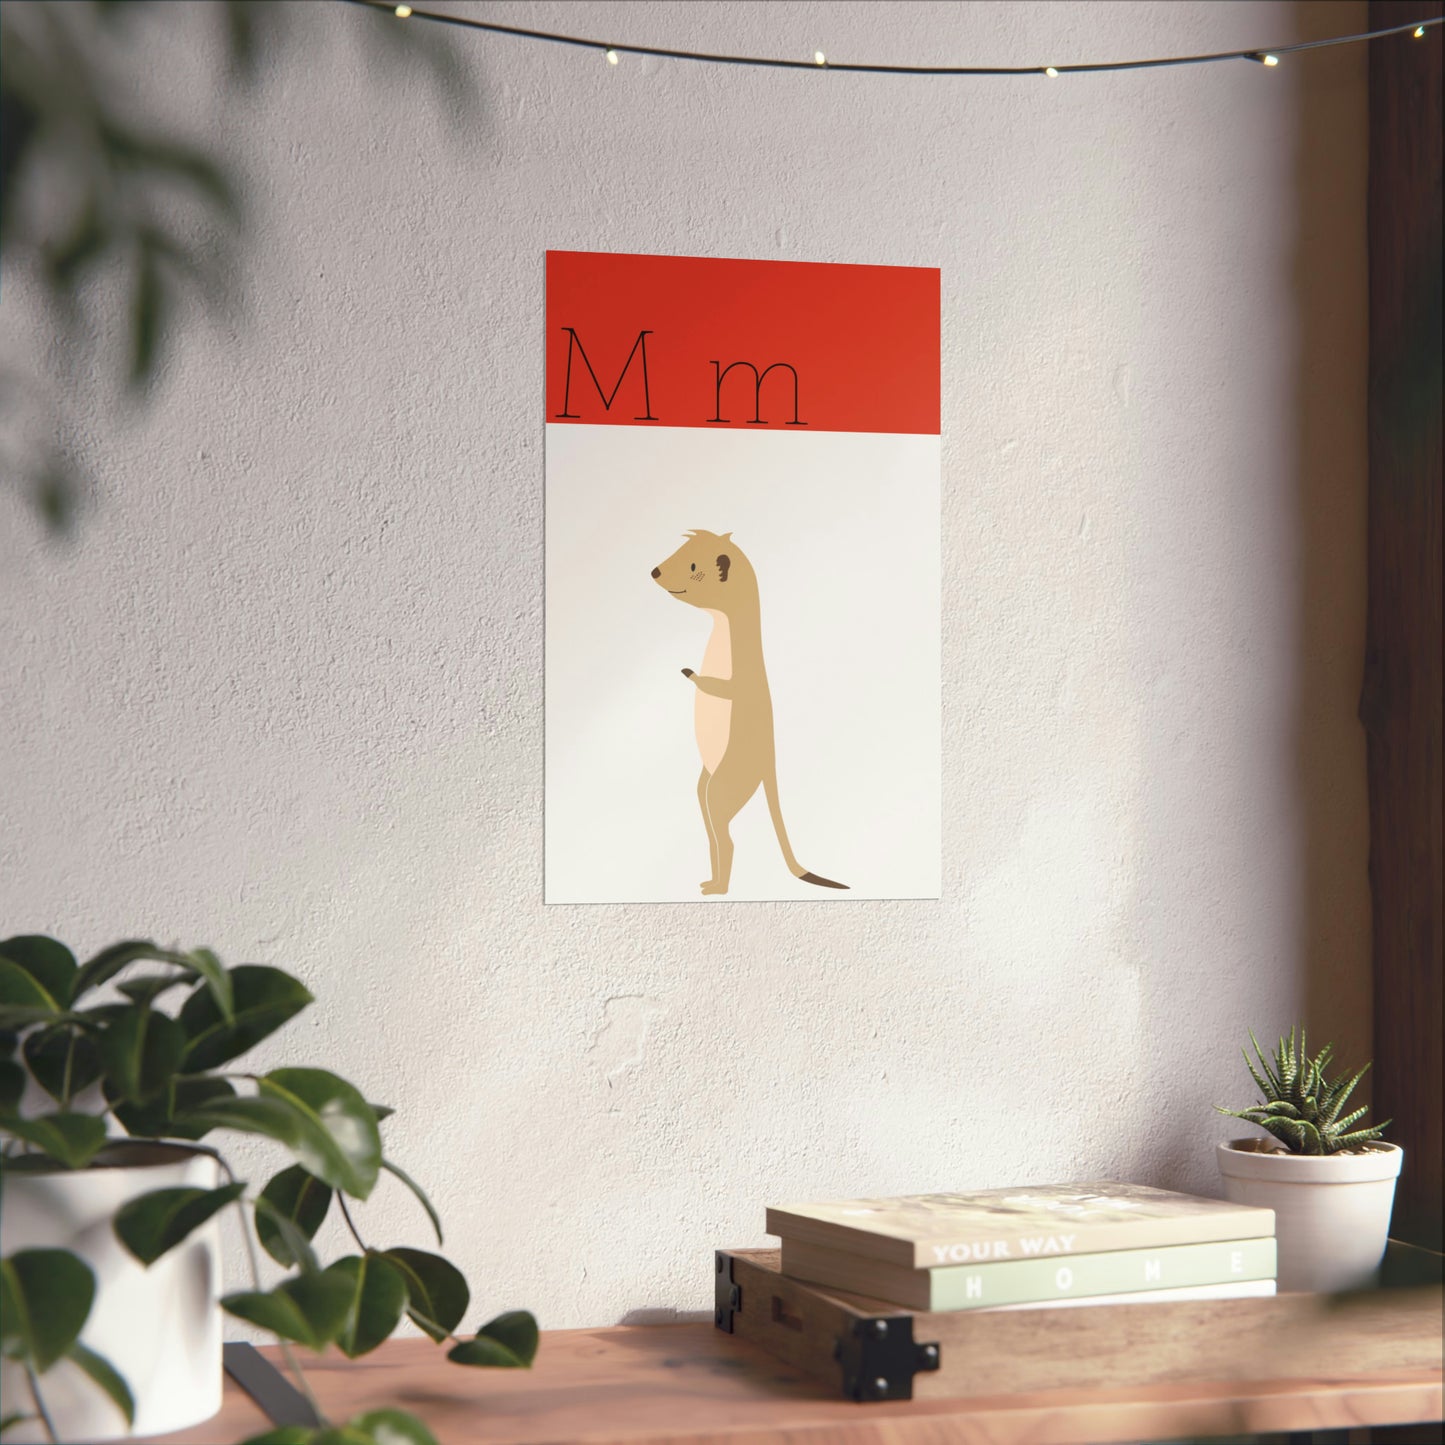 Meerkat Poster on White Wall With Plant and books